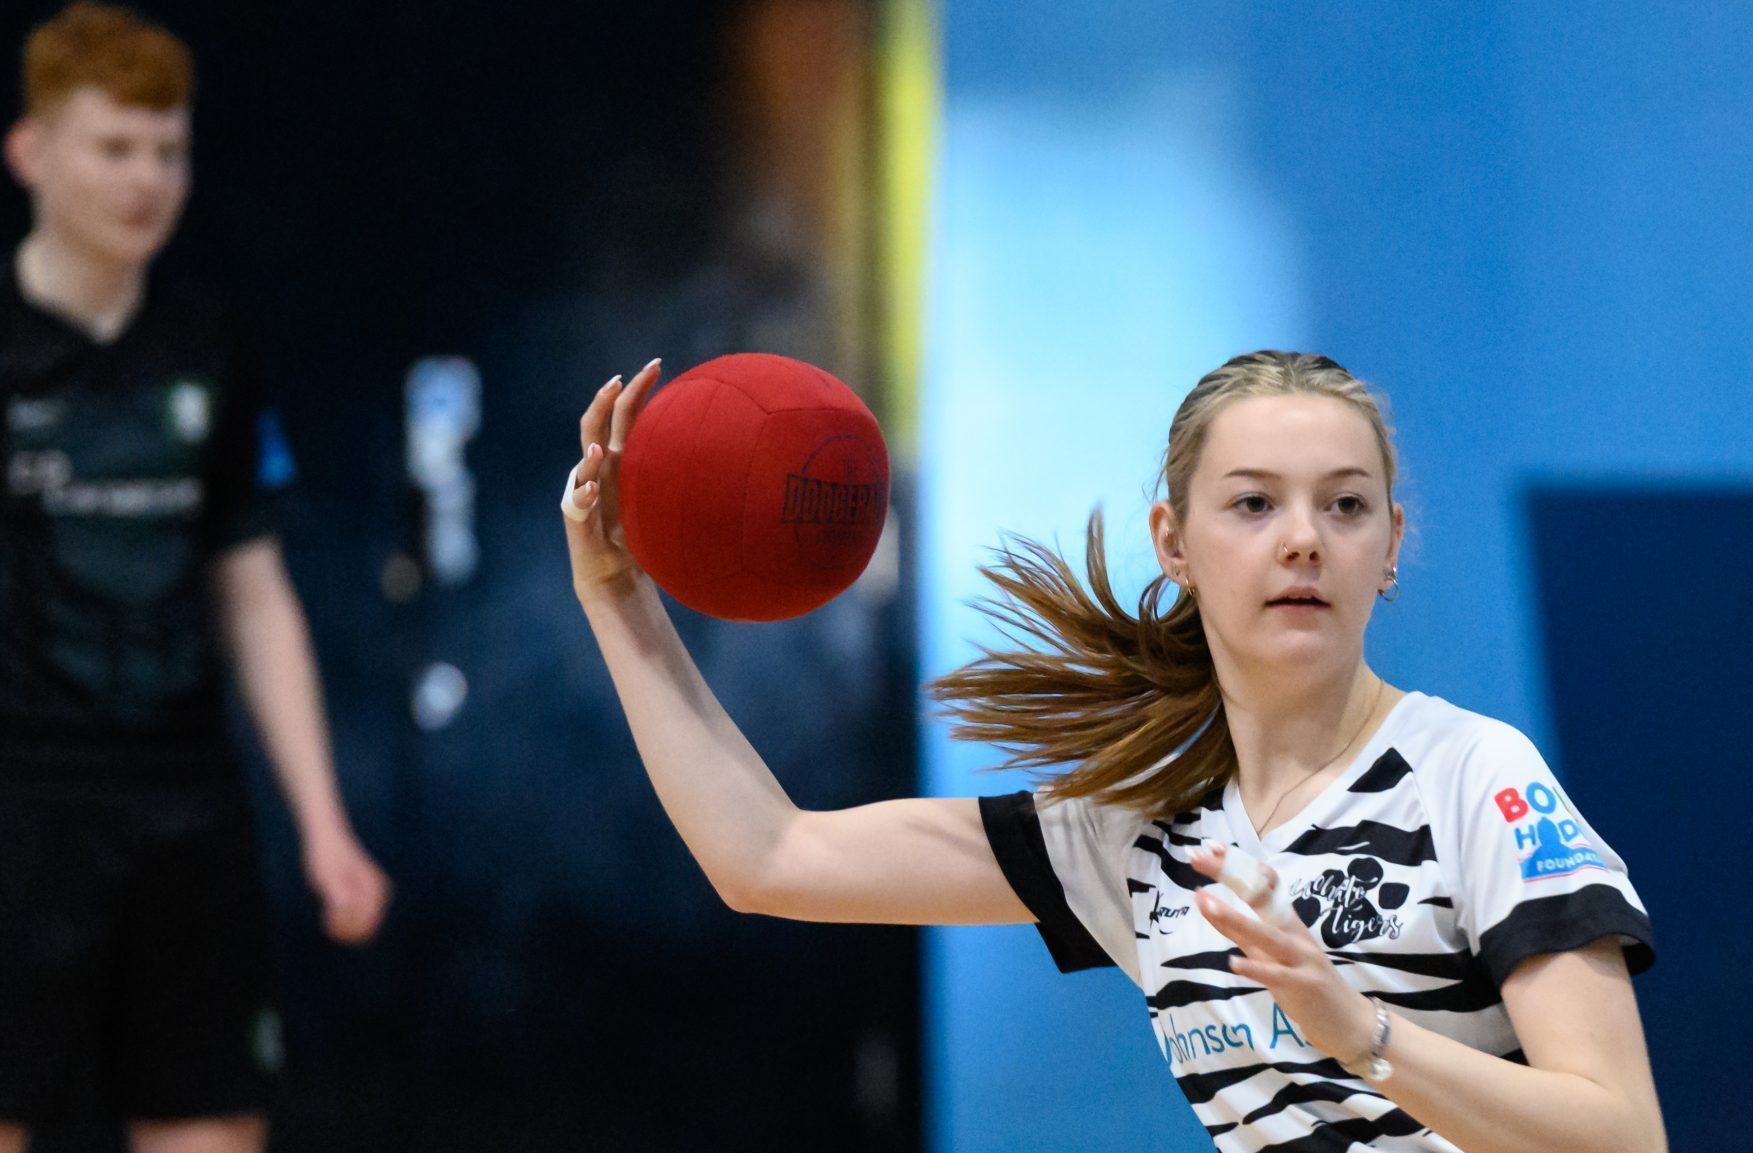 A young white woman playing dodgeball